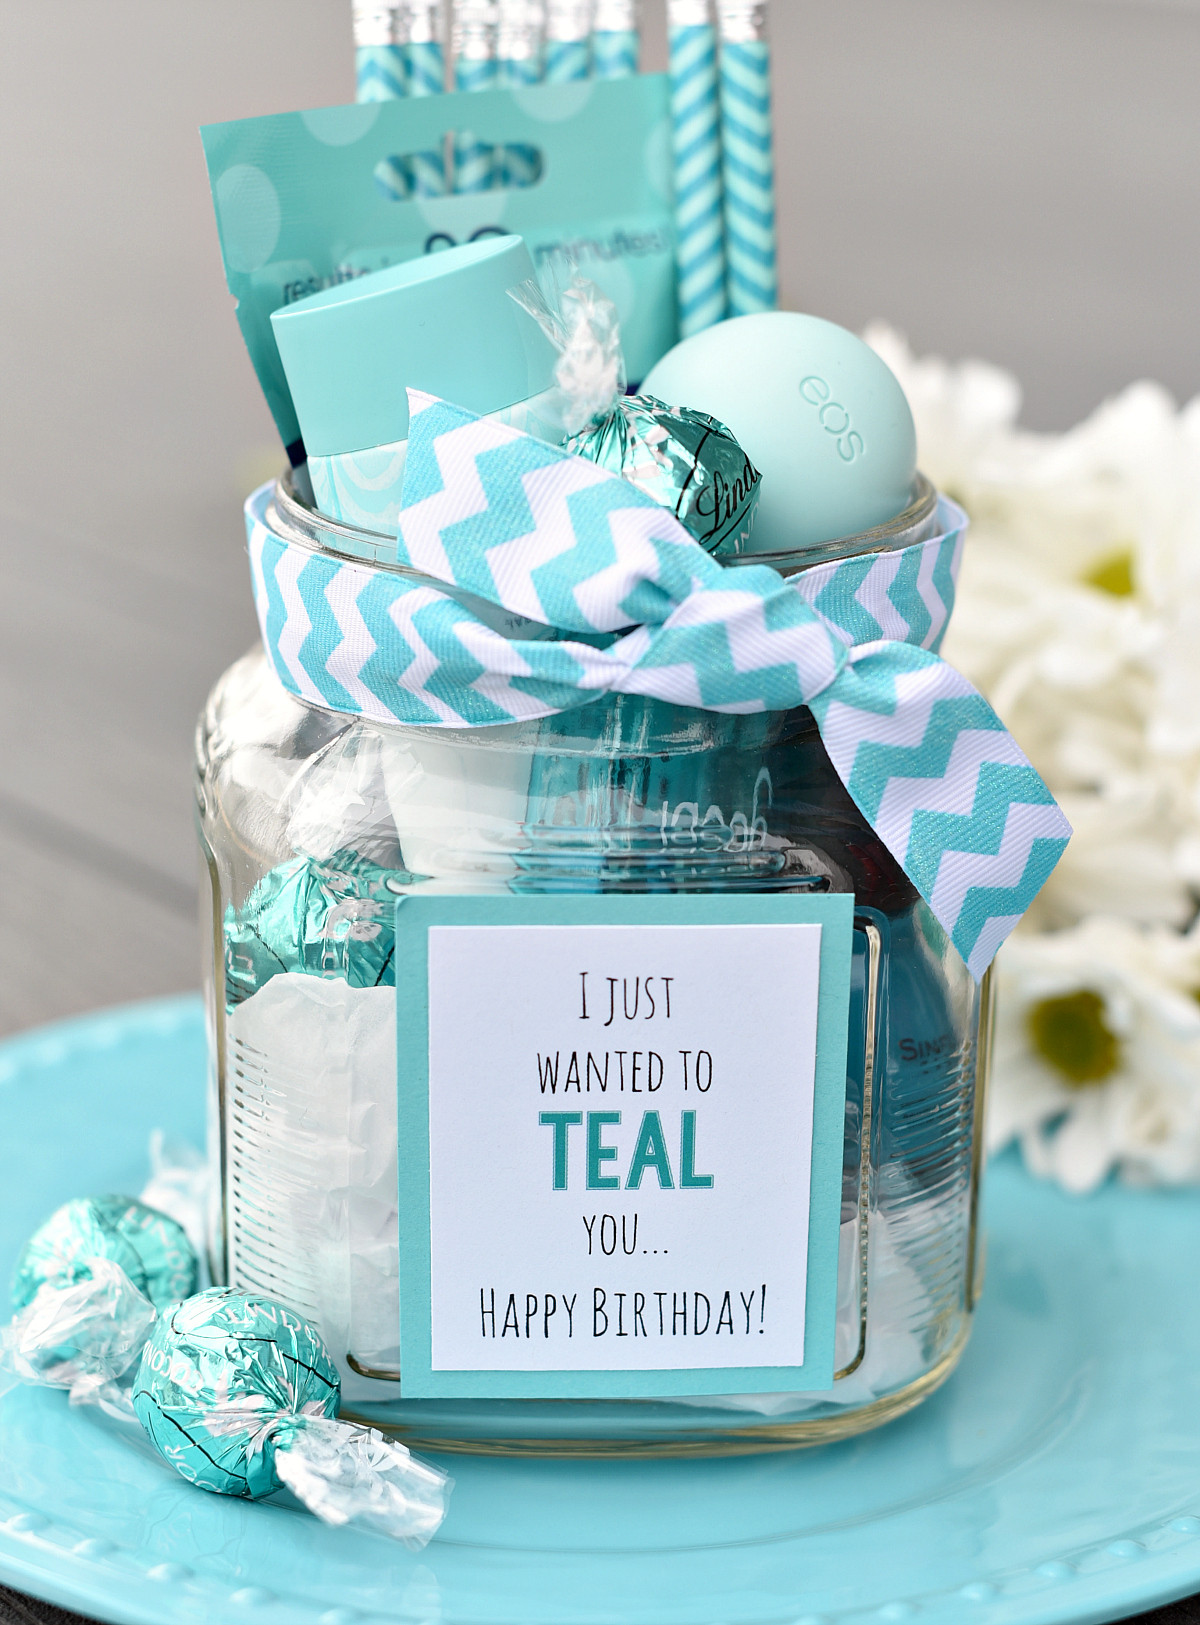 Gift Basket Ideas For Birthdays
 Teal Birthday Gift Idea for Friends – Fun Squared